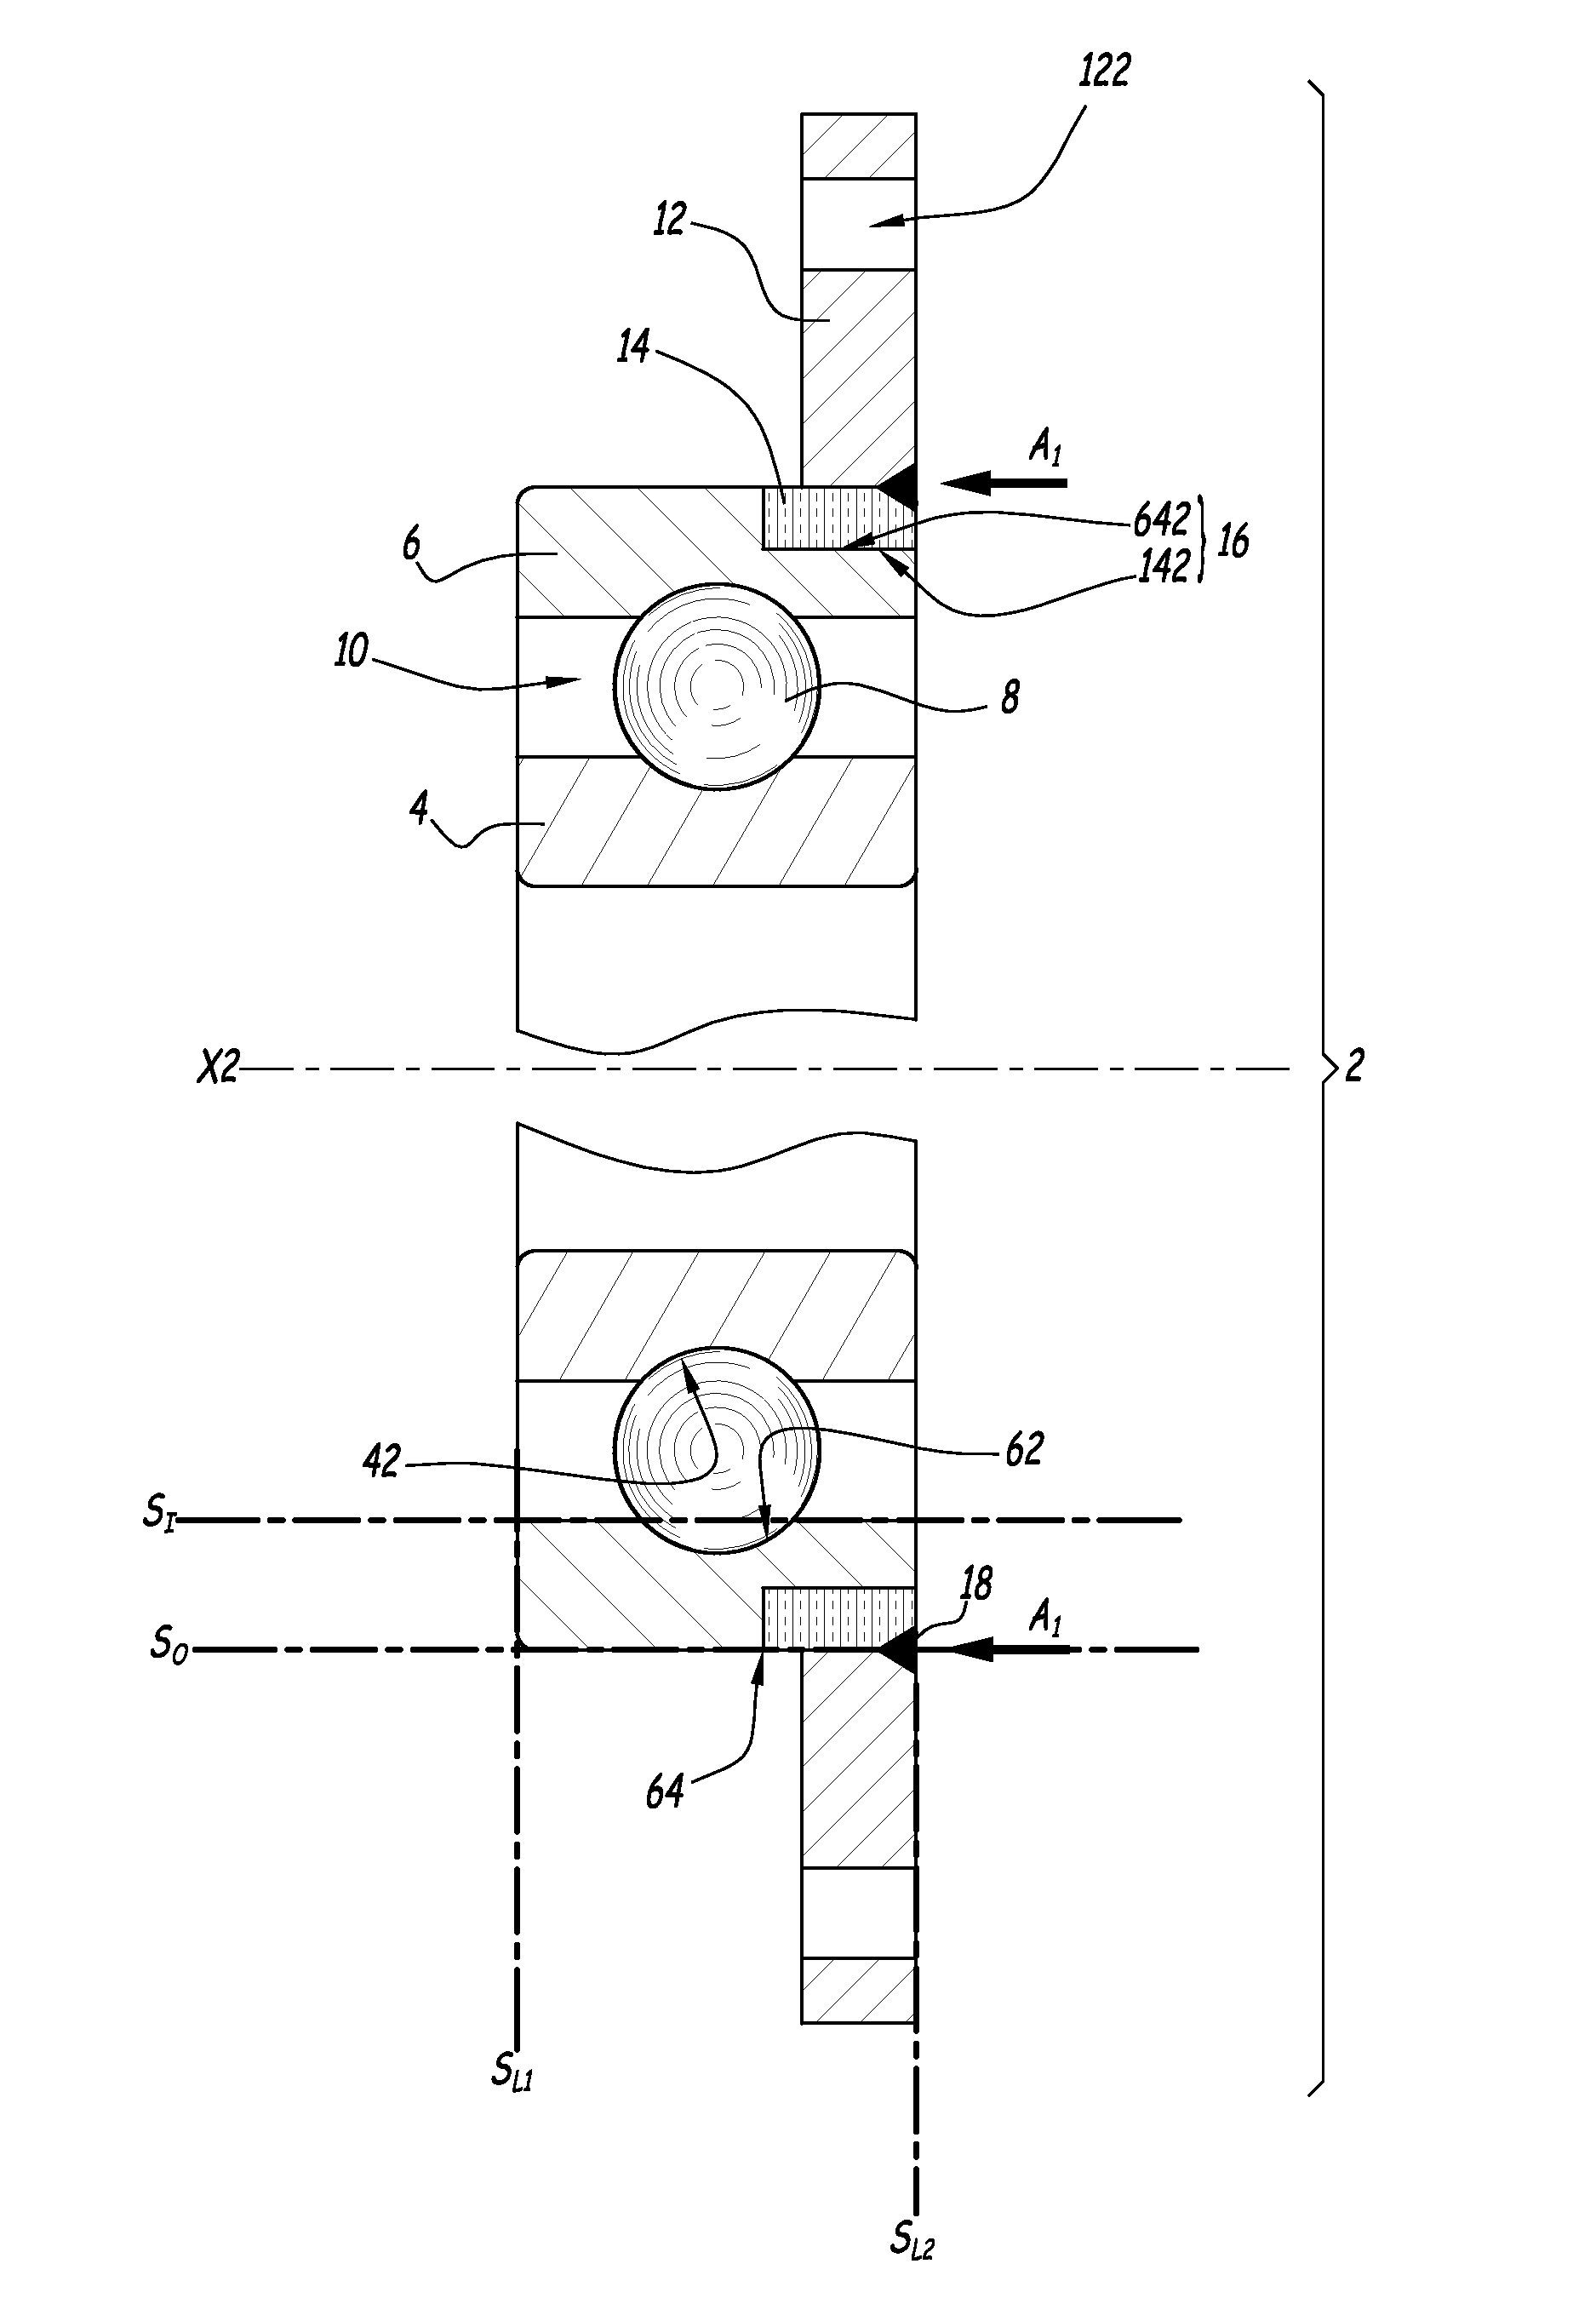 Method for manufacturing a rolling bearing and rolling bearing manufactured according to such a method